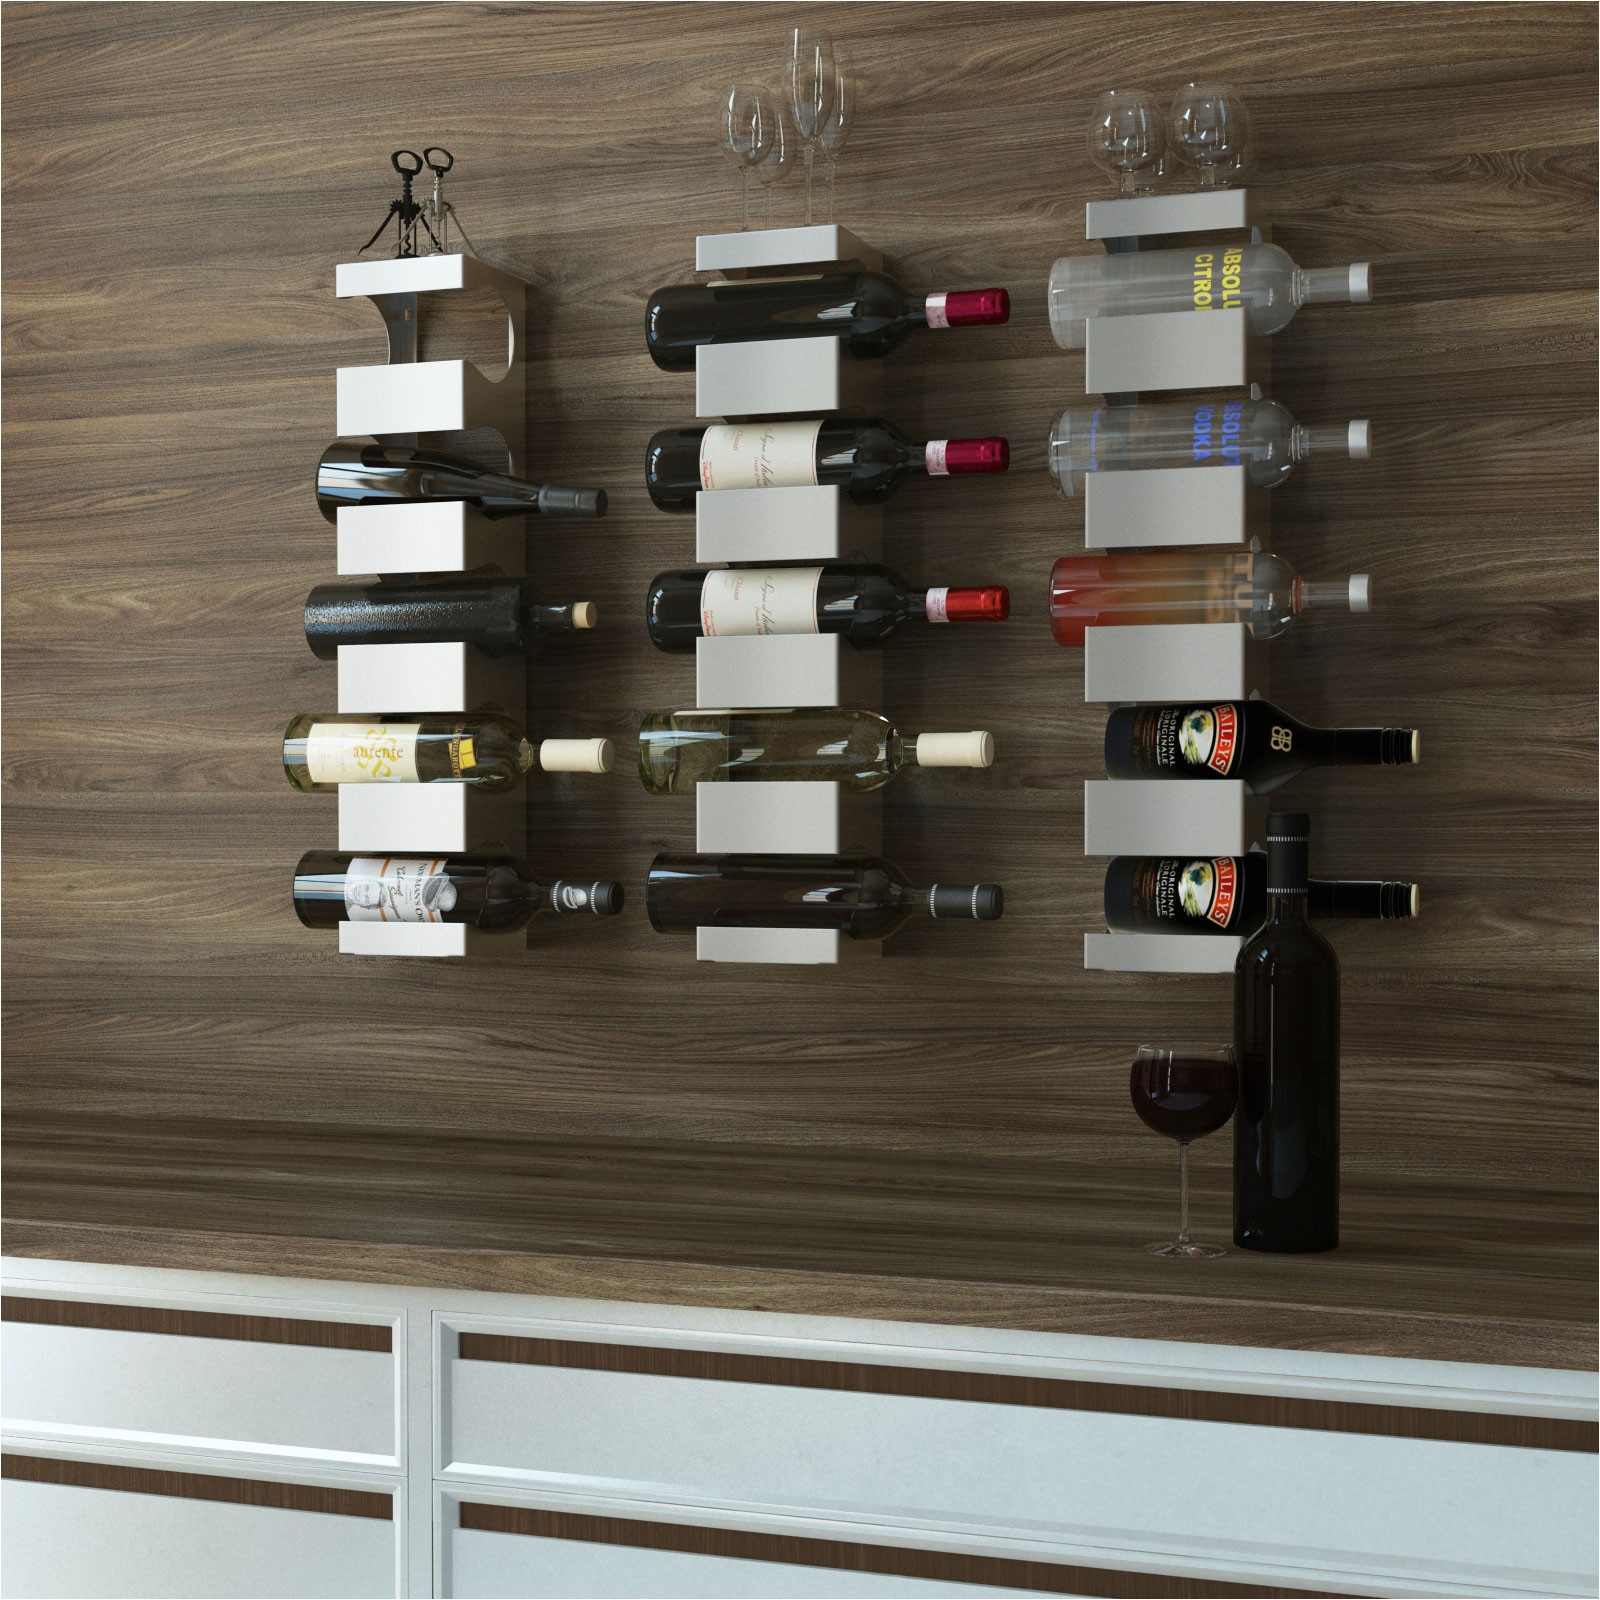 wine storage cabinet ikea home designs stainless steel shelves for fresh lovely pe s5h sink